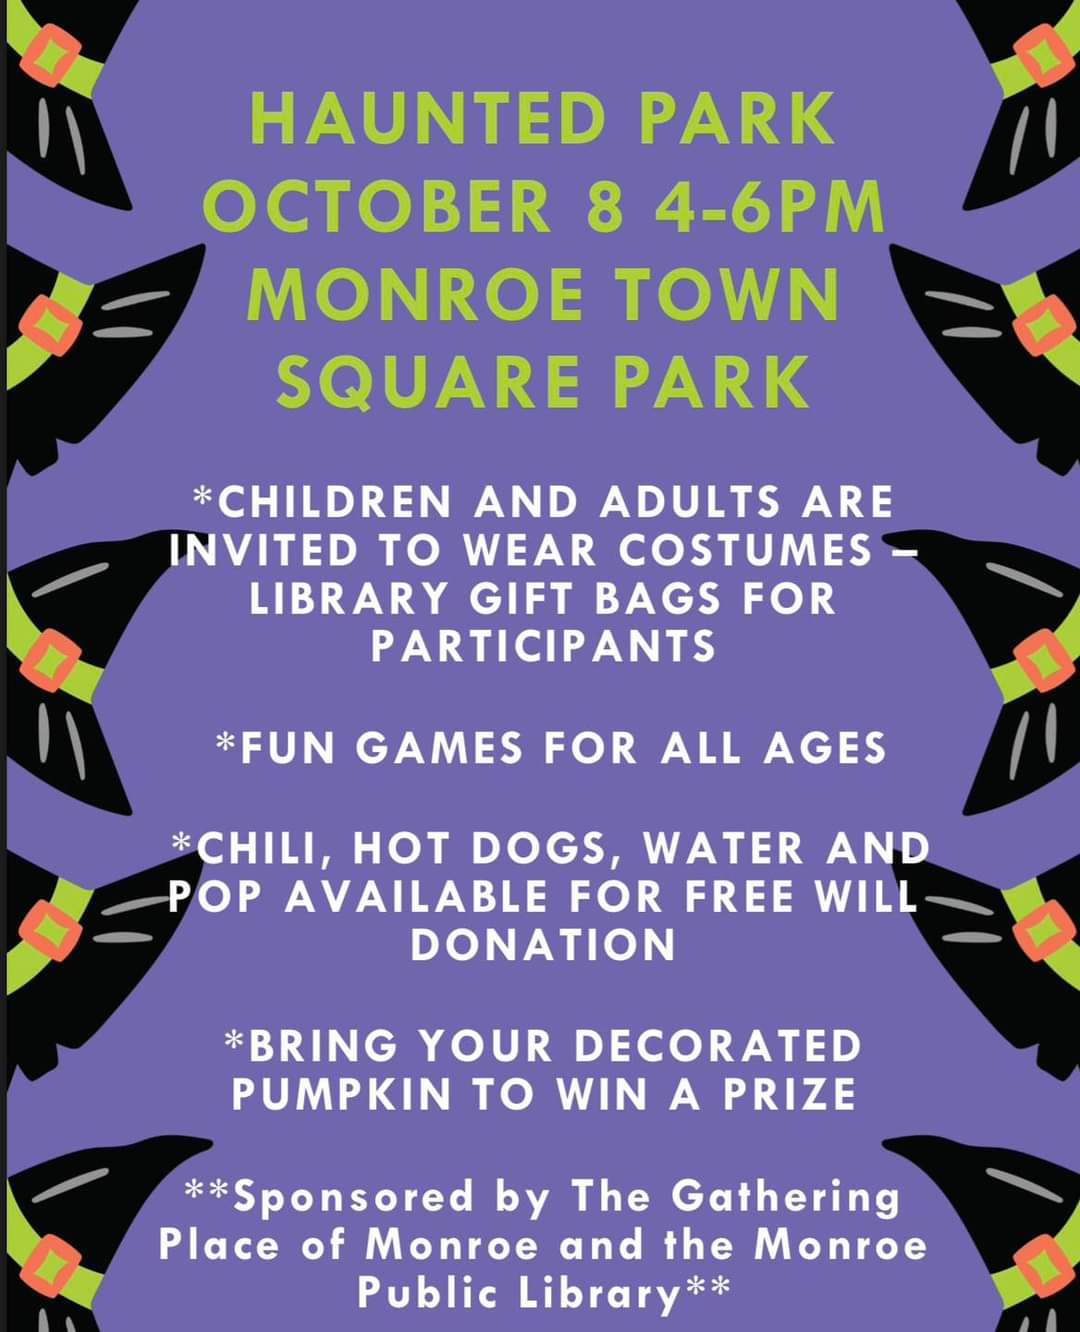 Get your costumes ready and see us in the park! 